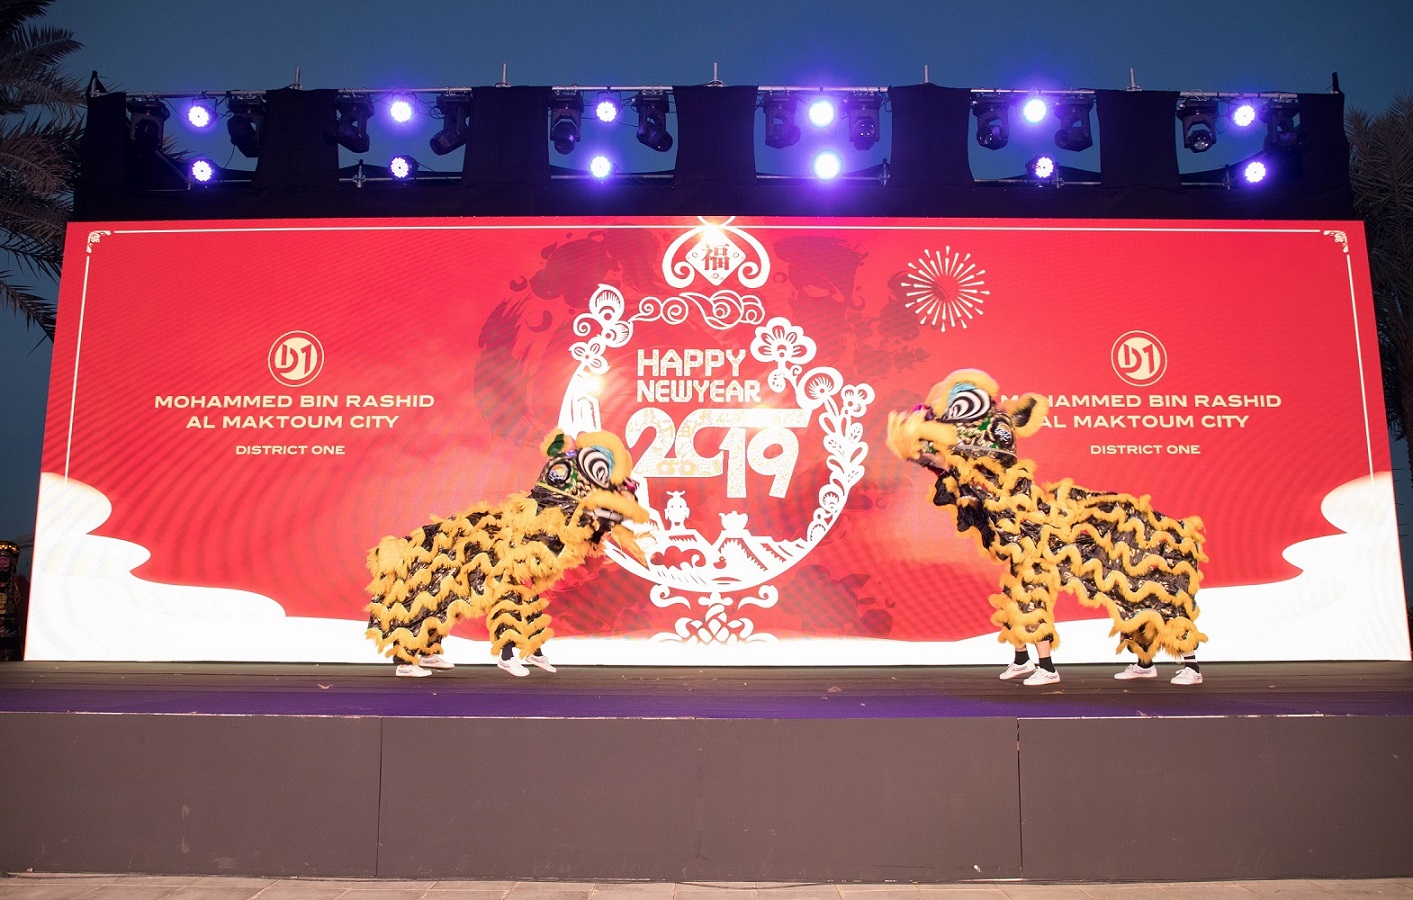 Mohammed Bin Rashid Al Maktoum City, District One Celebrates the Chinese New Year in Style